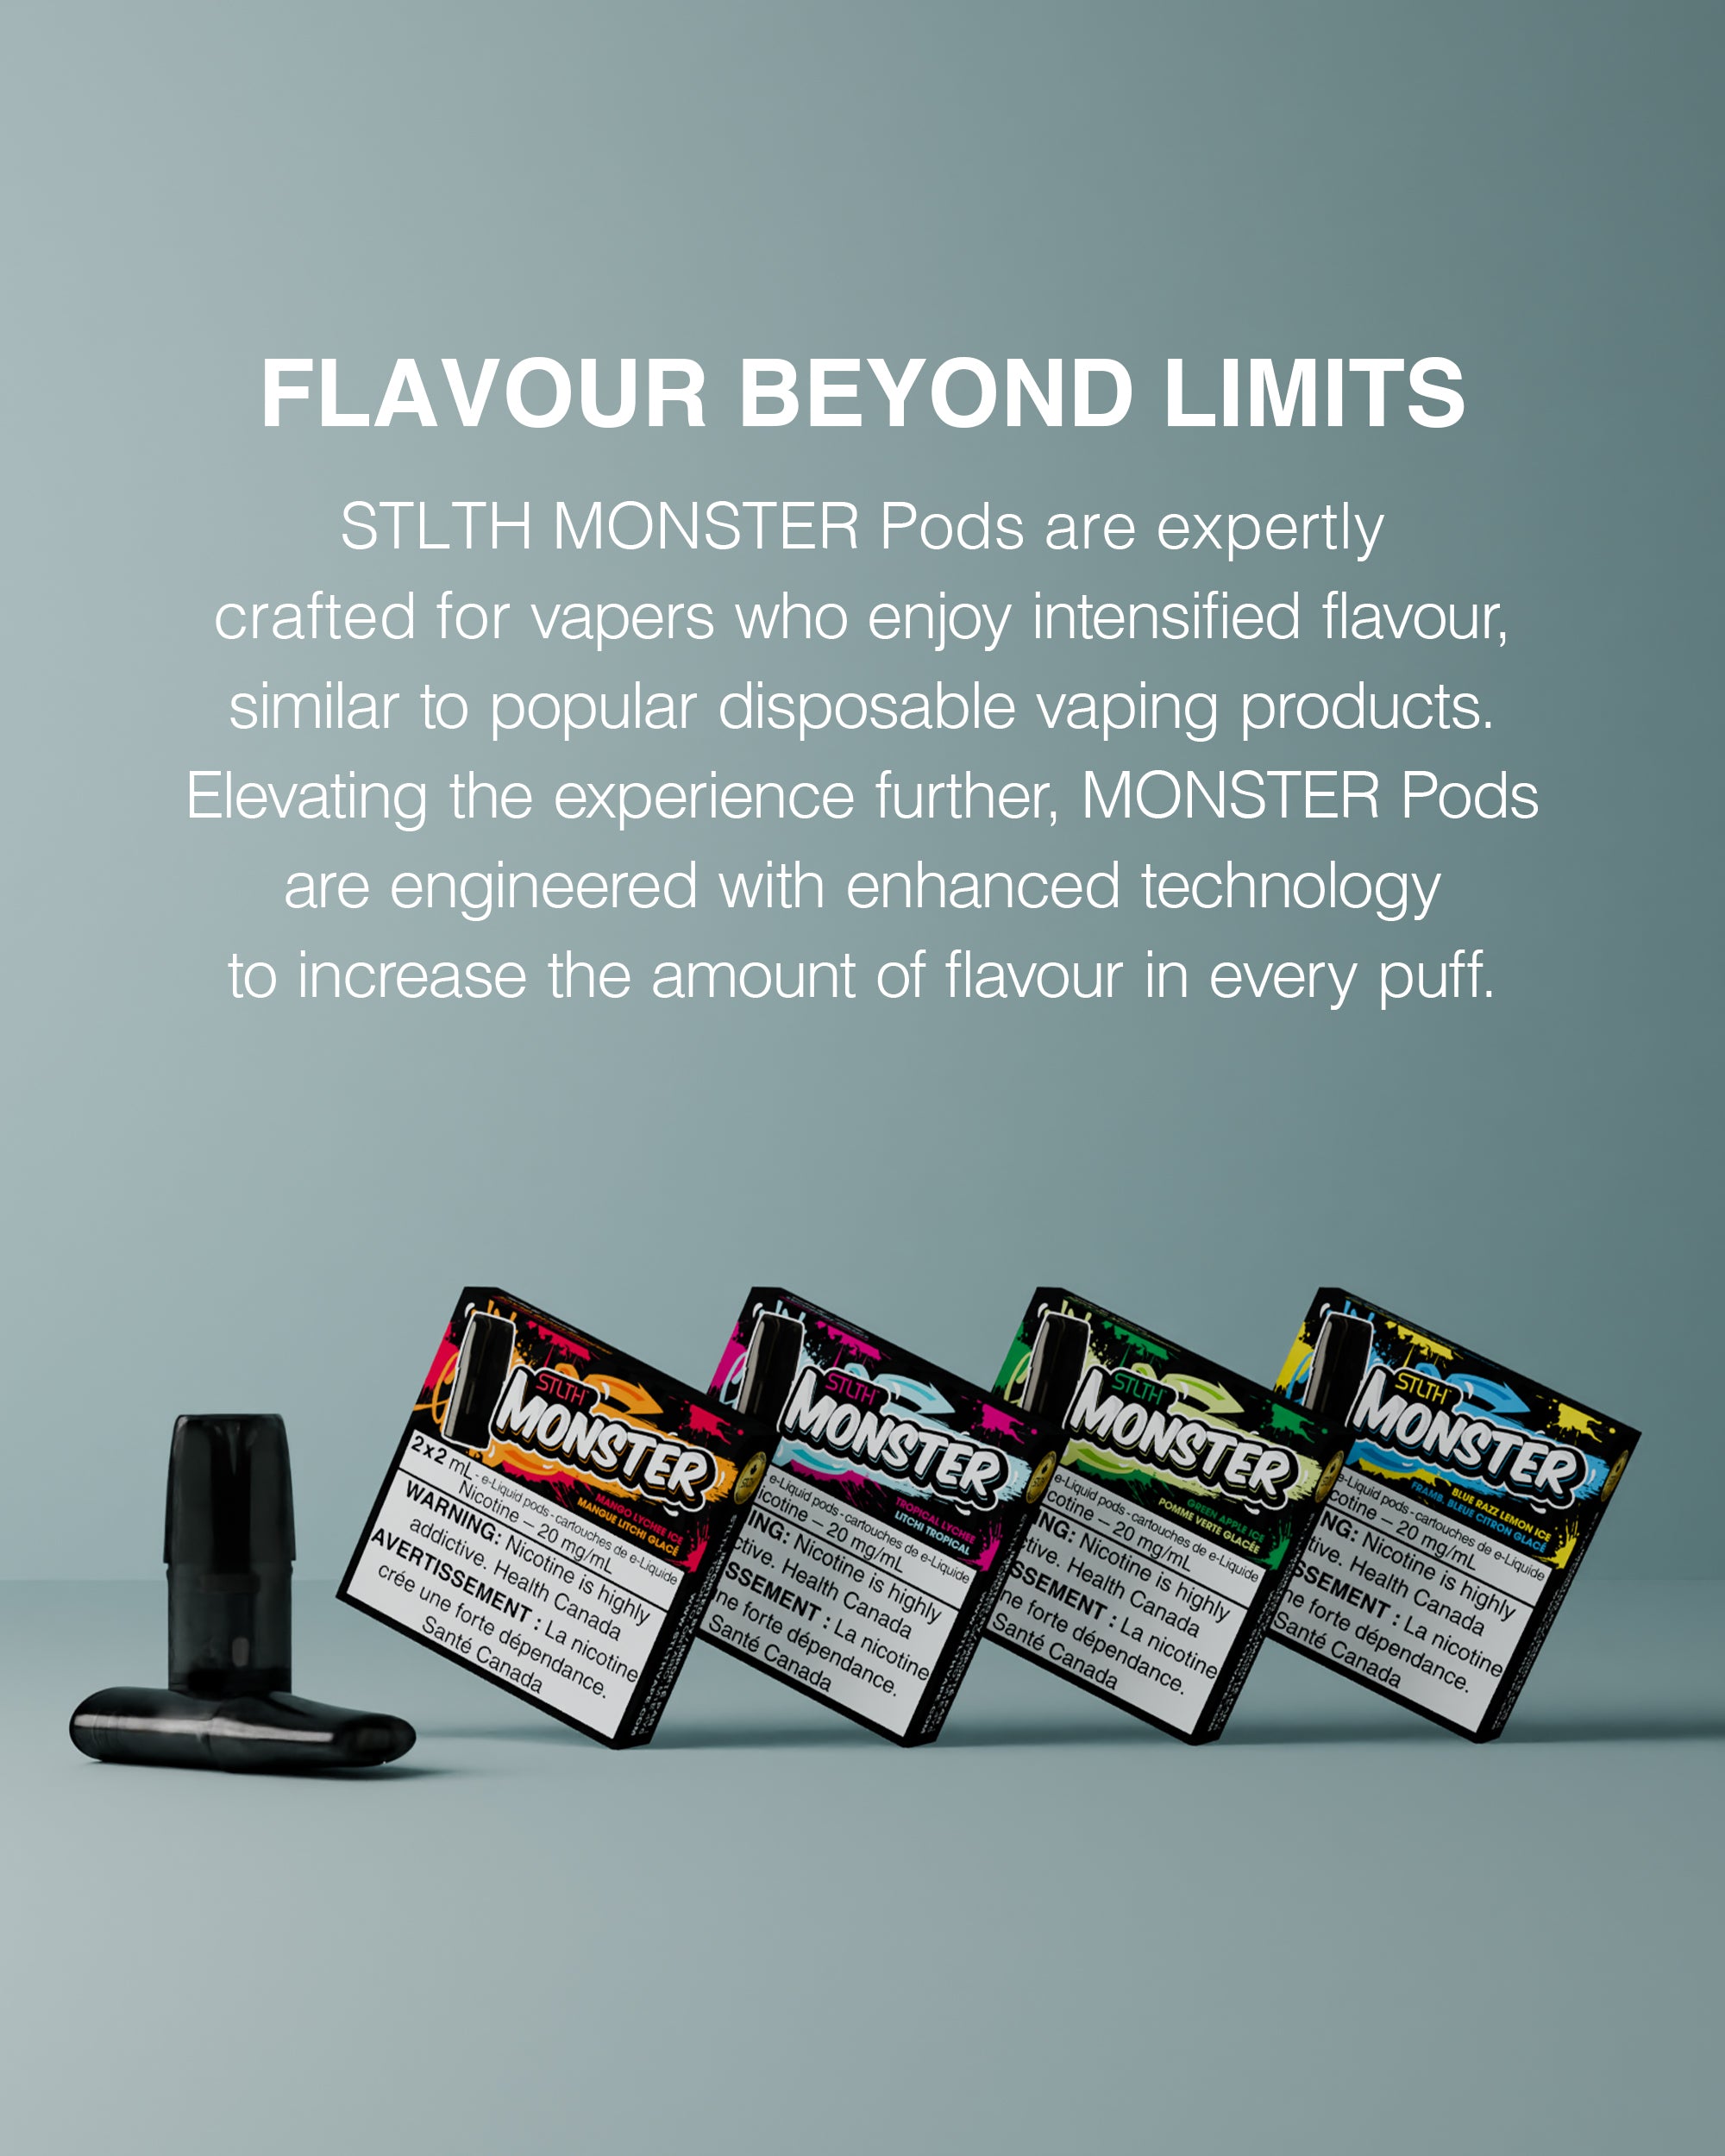 FLAVOUR BEYOND LIMITS: STLTH MONSTER Pods are expertly crafted for vapers who enjoy intensified flavour, similar to popular disposable vaping products. Elevating the experience further, MONSTER Pods are engineered with enhanced technology to increase the amountof flavour in every puff.